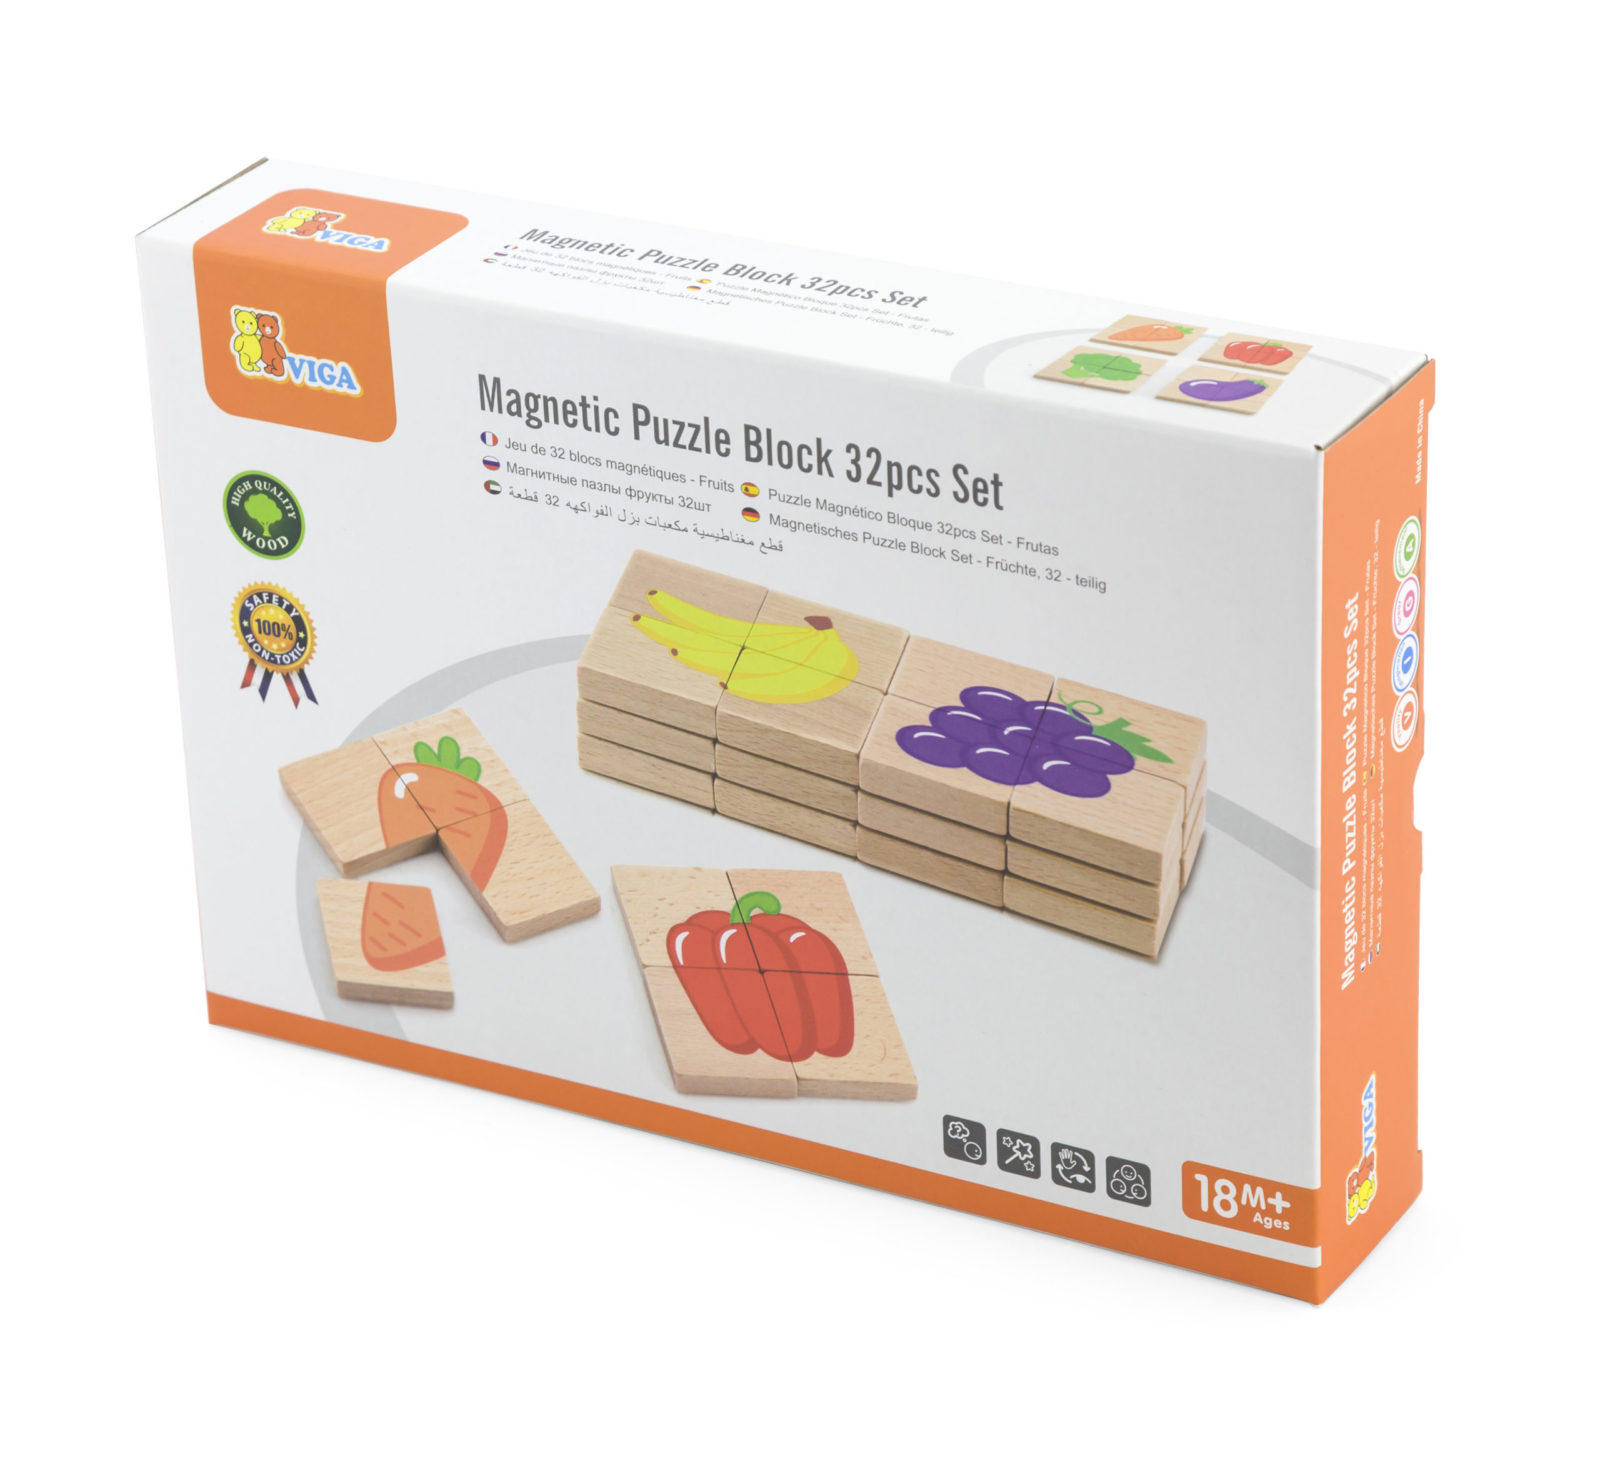 Viga Packaging containing magnetic wooden fruit and vegetable puzzle tiles